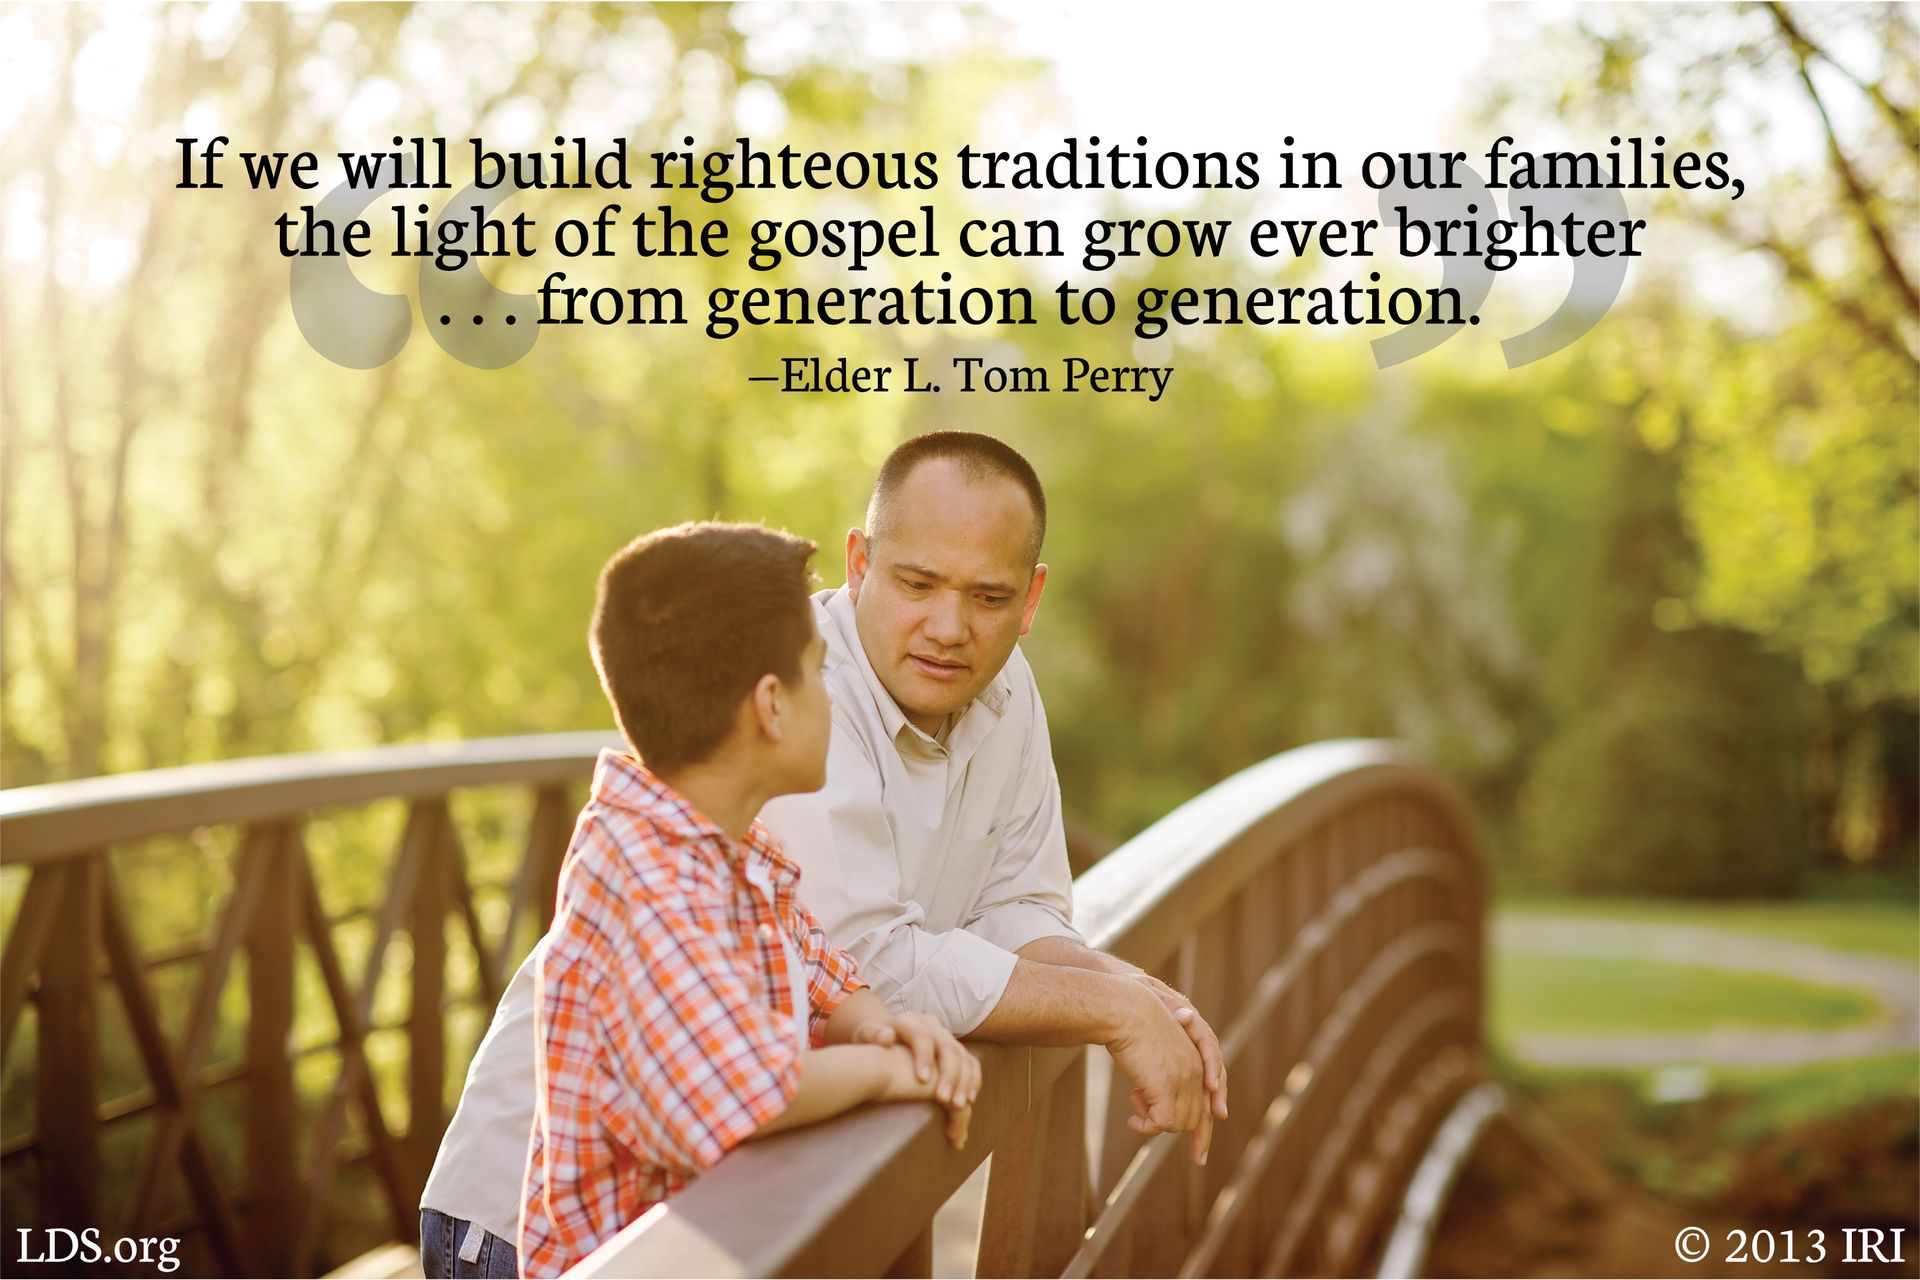 “If we will build righteous traditions in our families, the light of the gospel can grow ever brighter … from generation to generation.”—Elder L. Tom Perry, “Family Traditions” © undefined ipCode 1.